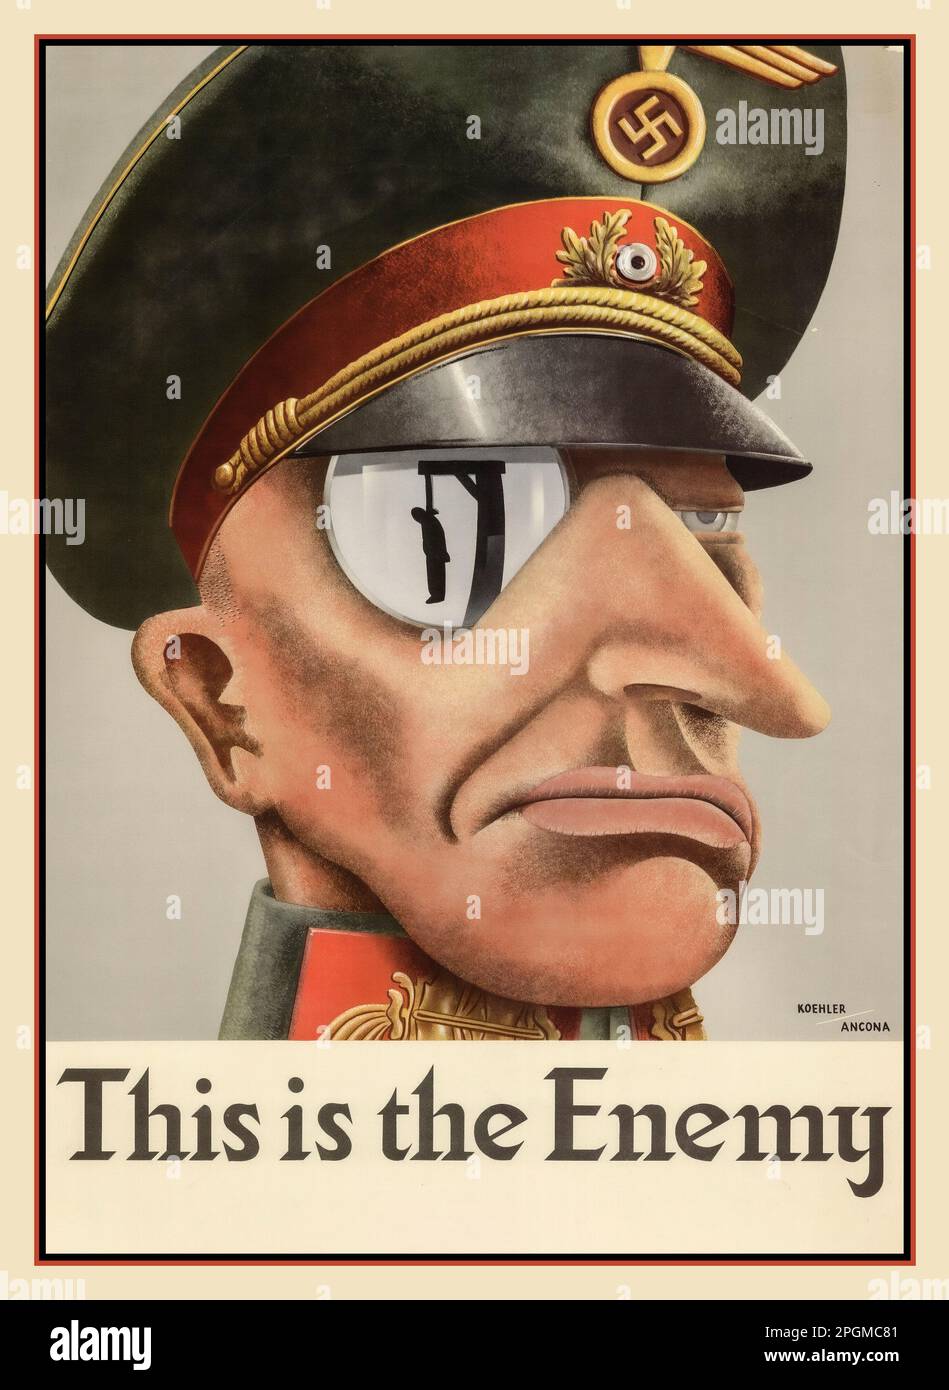 Vintage WW2 1940s anti Nazi Propaganda Poster featuring a caricature Nazi officer wearing an officers hat with swastika with a monocle reflecting a man hung on a scaffold. Caption THIS IS THE ENEMY' A prize winning poster in the USA Stock Photo